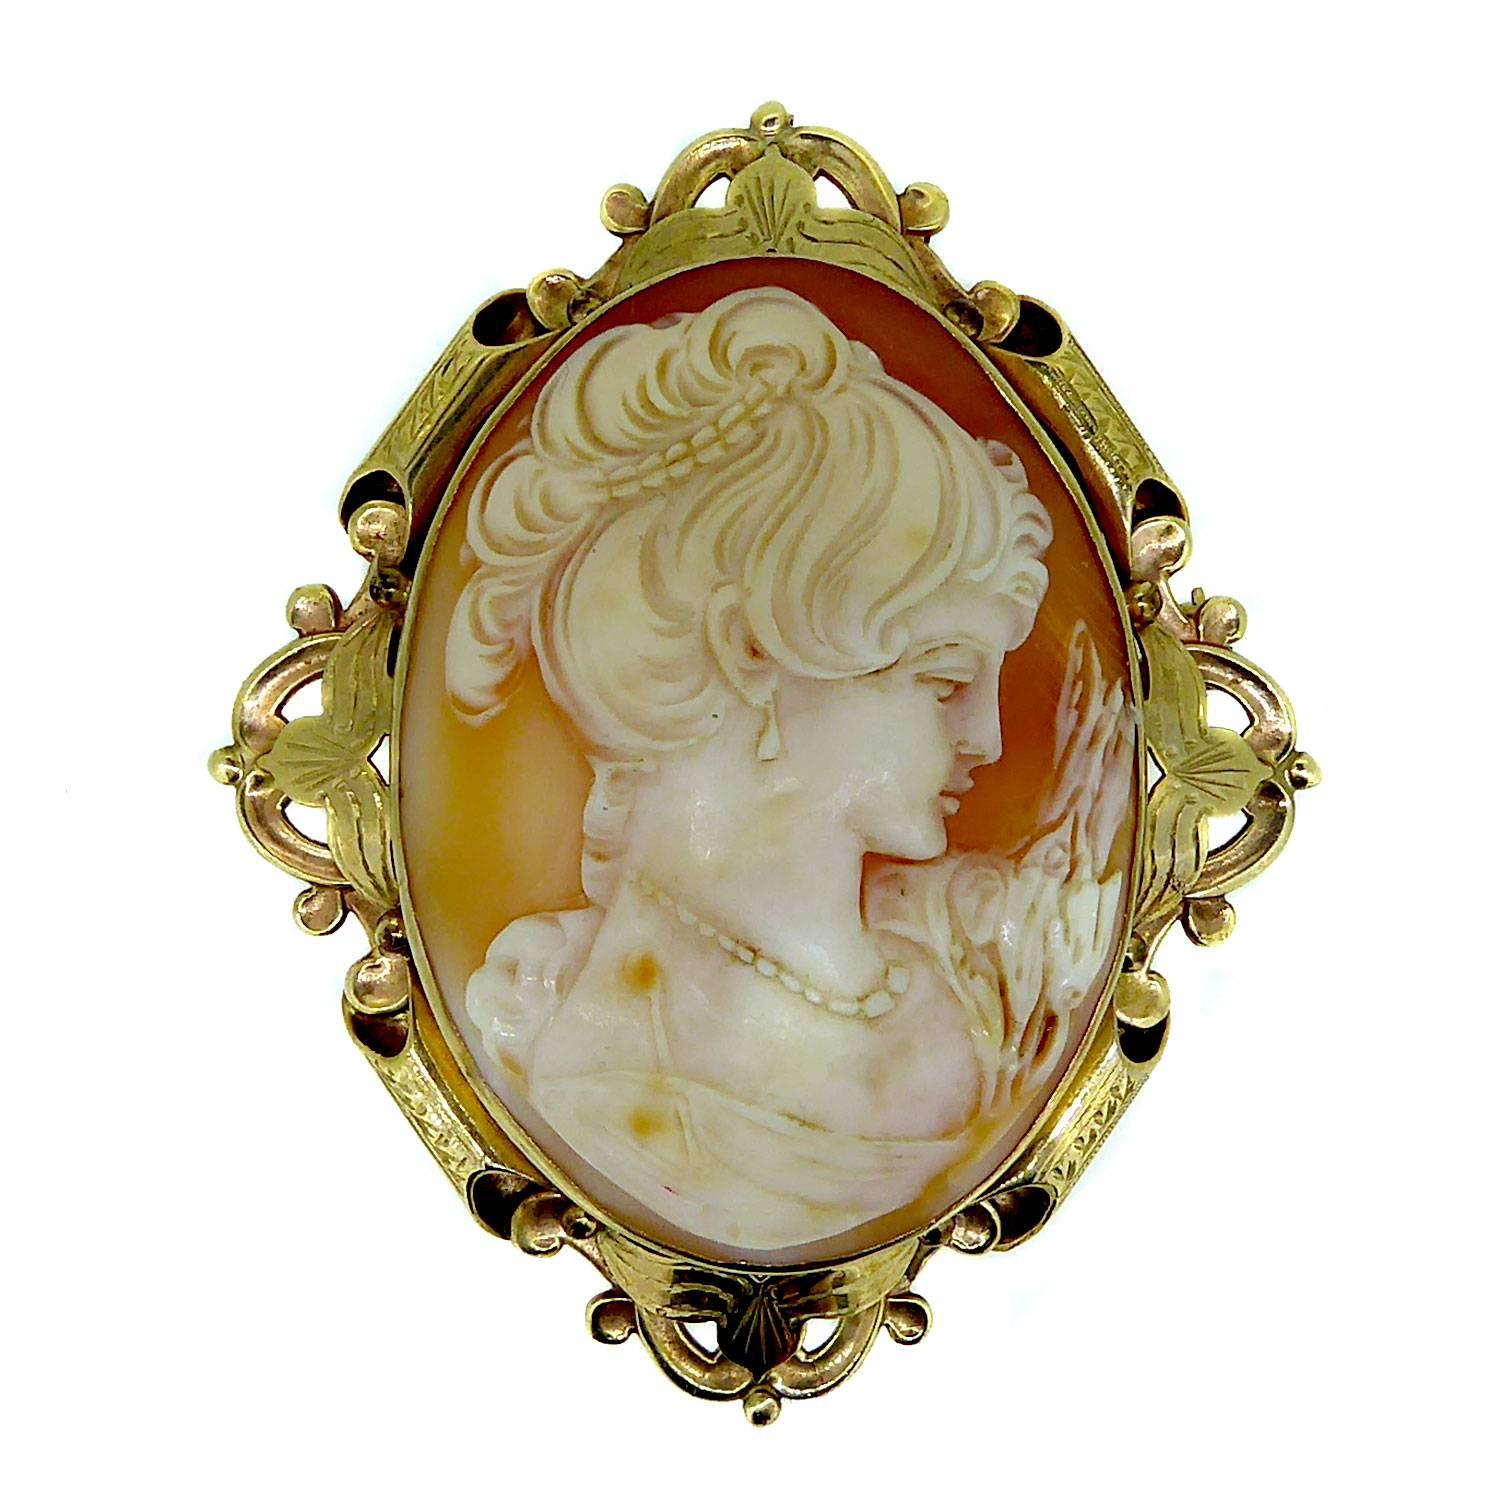 Vintage Carved Shell Cameo Brooch, Ornate Gold Surround, Hallmarked, 1965